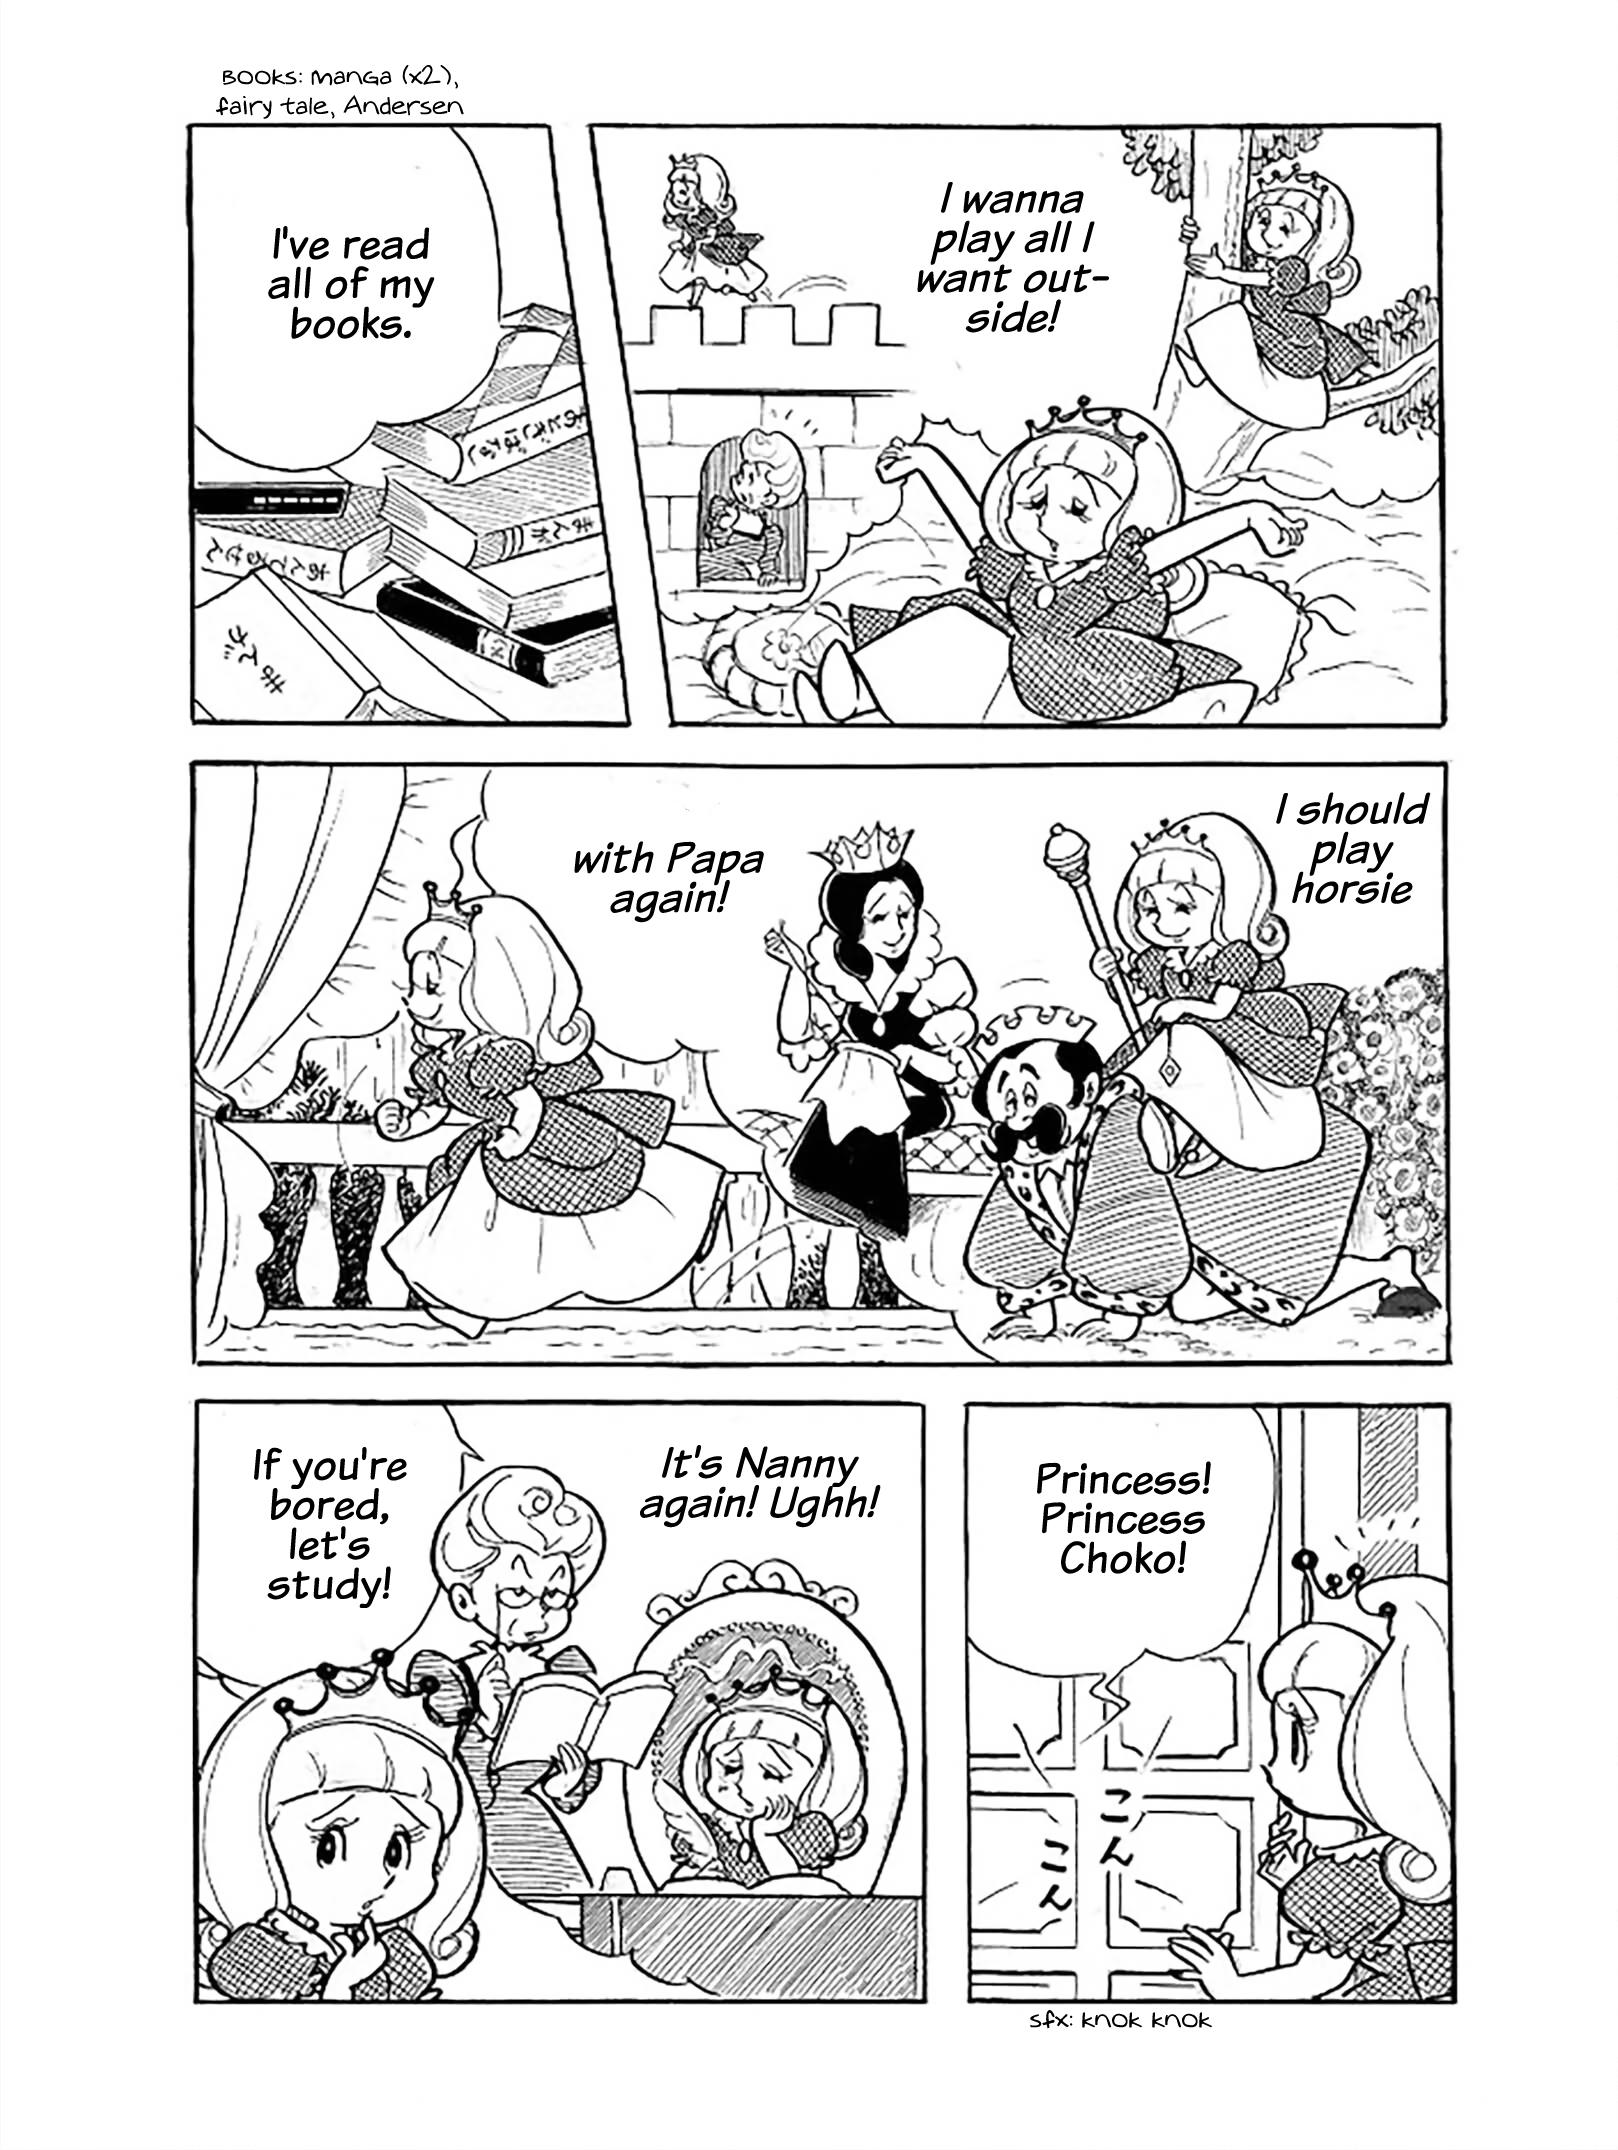 Princess Chokomaka Of Laid-Back Castle Vol.1 Chapter 3: If You're Bored, Study! - Picture 3